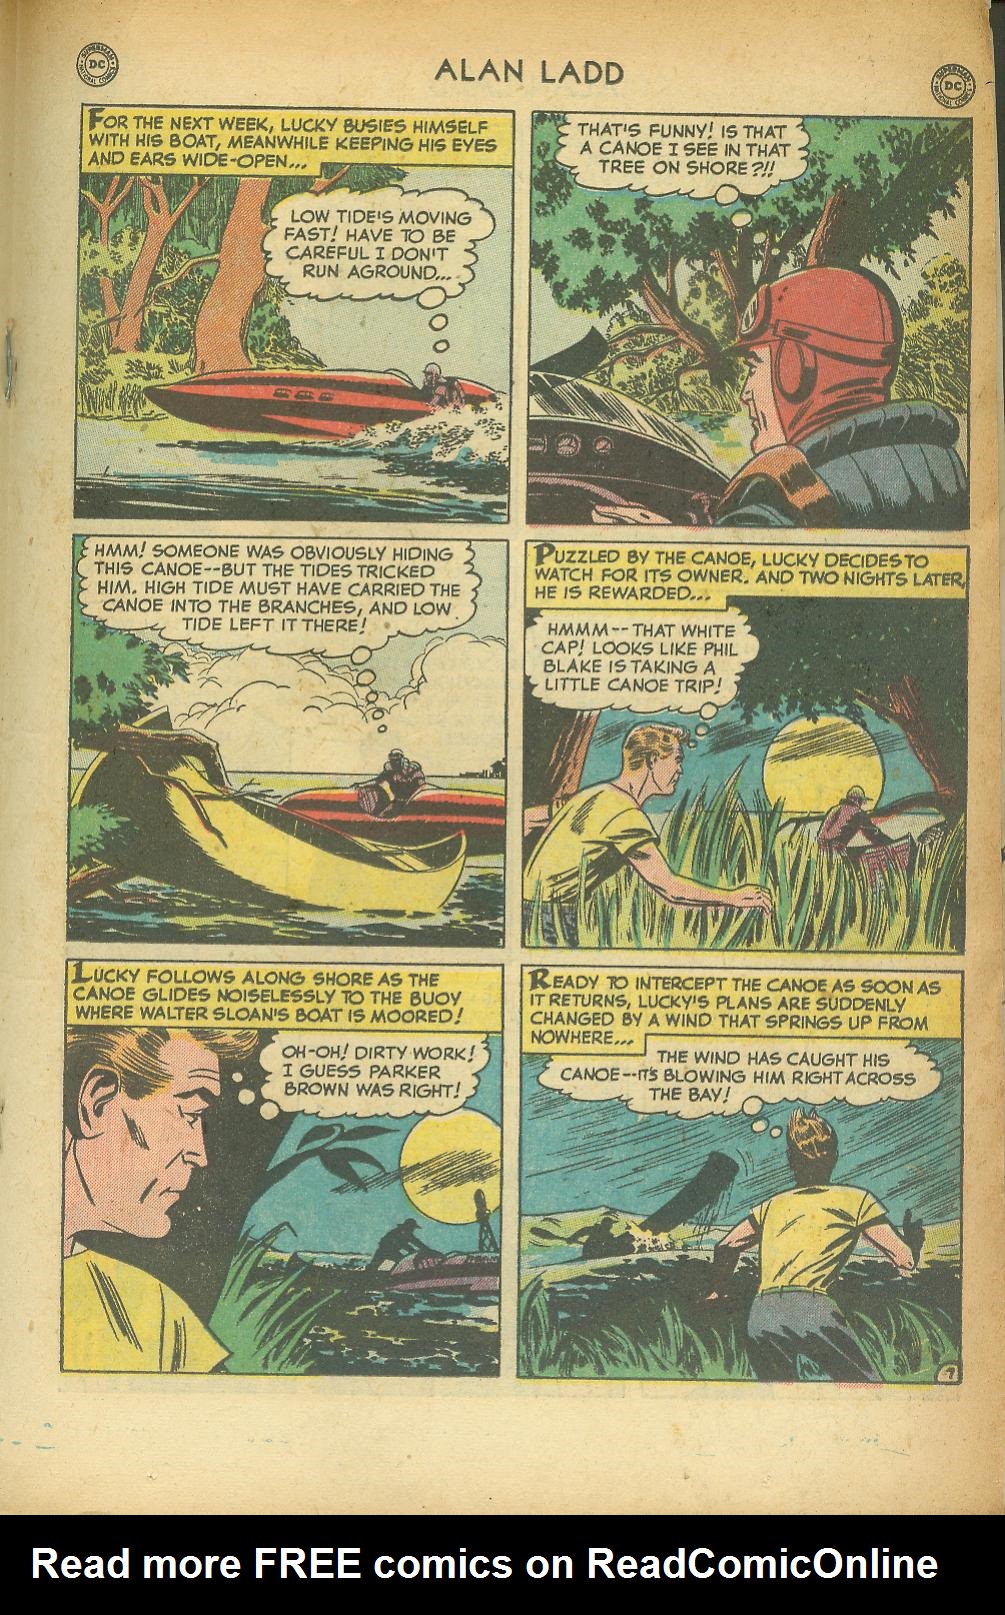 Read online Adventures of Alan Ladd comic -  Issue #8 - 27